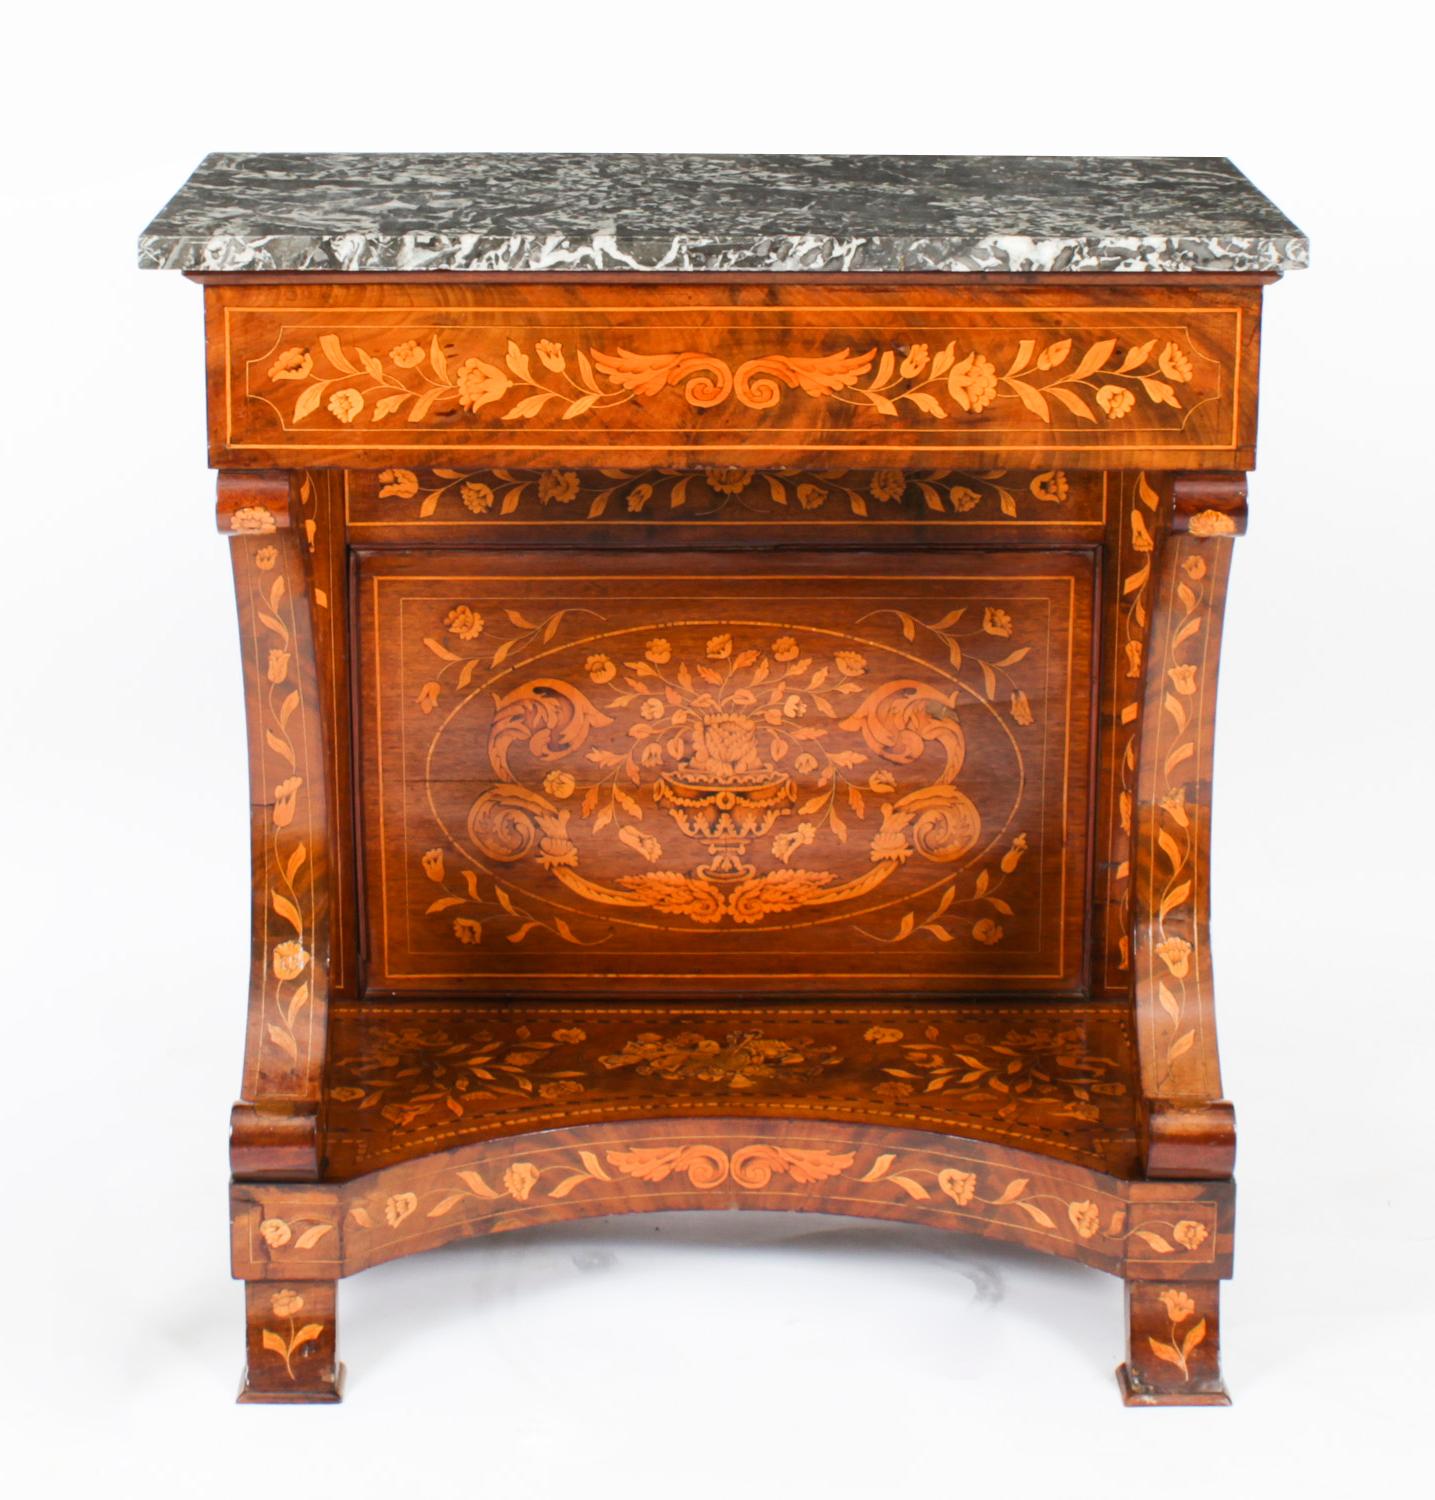 This is a beautifully crafted antique Dutch walnut and marquetry console table, circa 1830 in date.
 
This antique console table is surmounted by a stunning Gris St Anne grey marble top. The top and frieze are supported by C-scroll end supports with